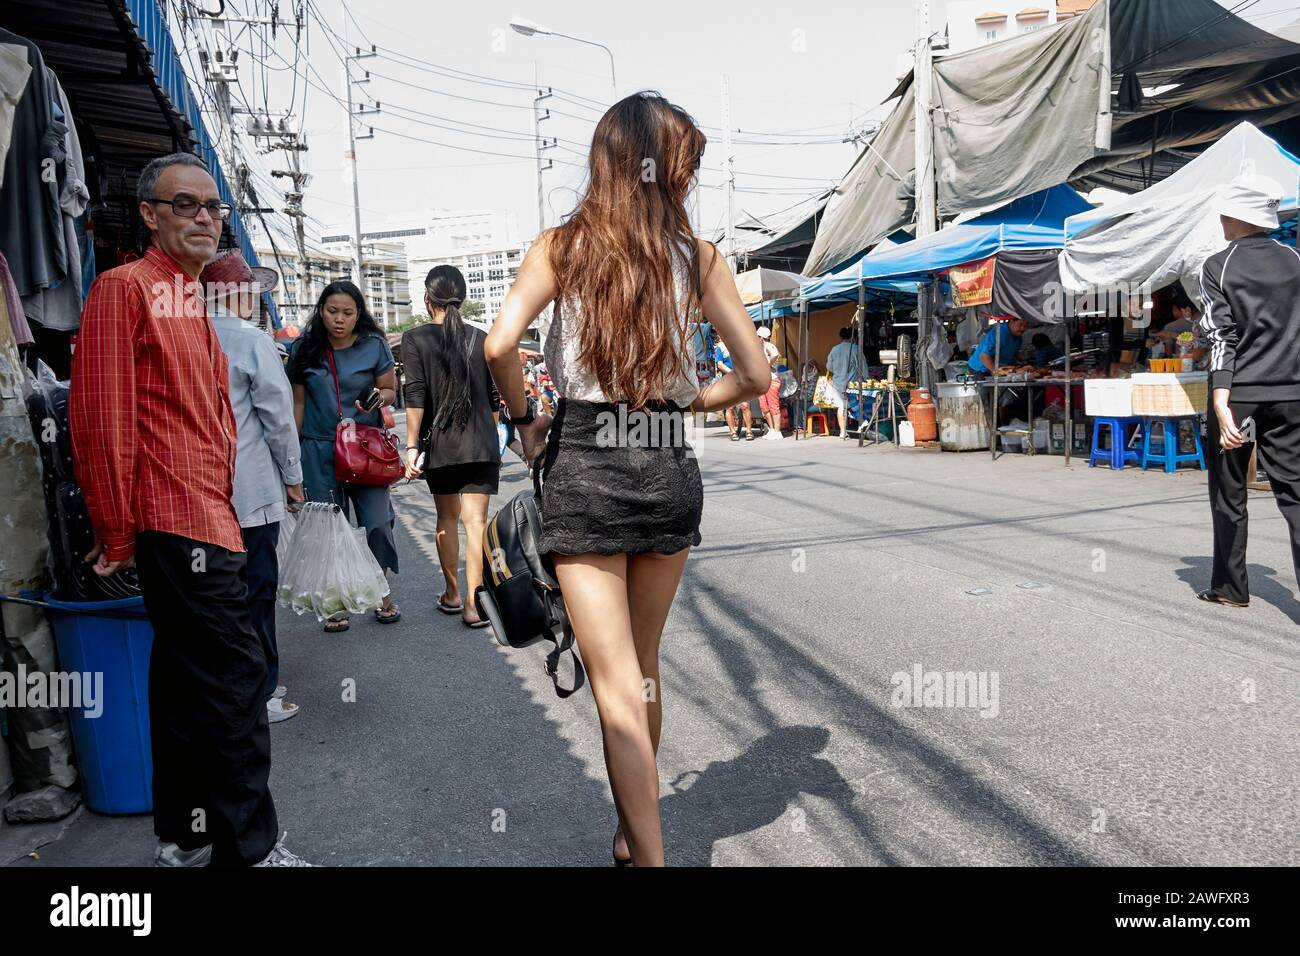 Woman wearing a mini skirt attracting a furtive glance from male admirer; Thailand street Stock Photo